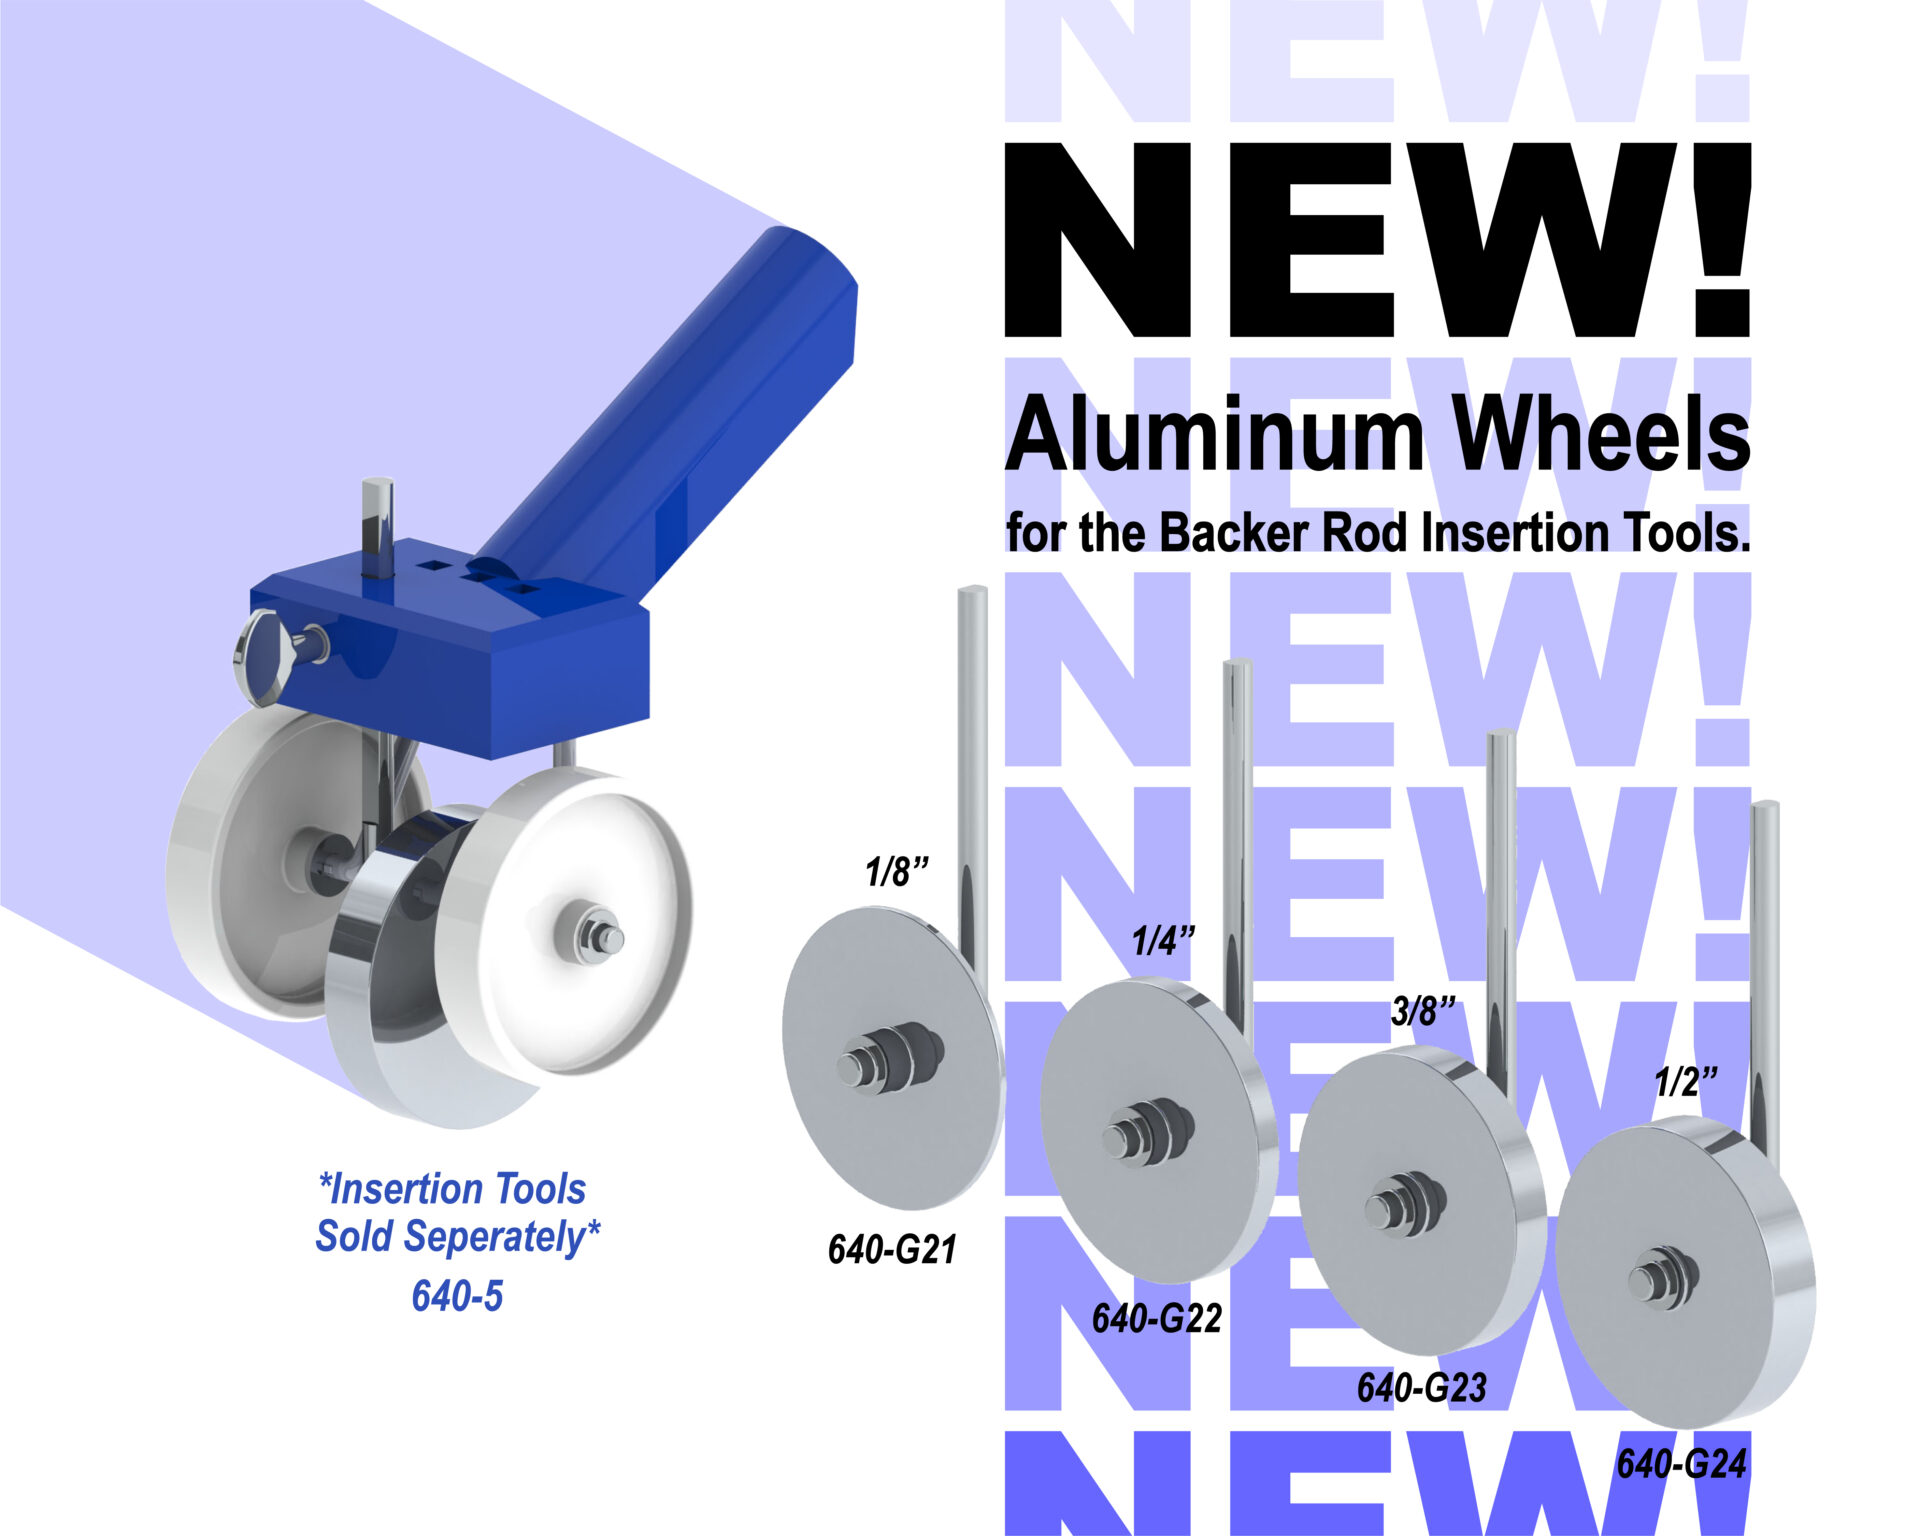 Albion Engineering's New Aluminum Wheels for the Backer Rod Insertion Tools